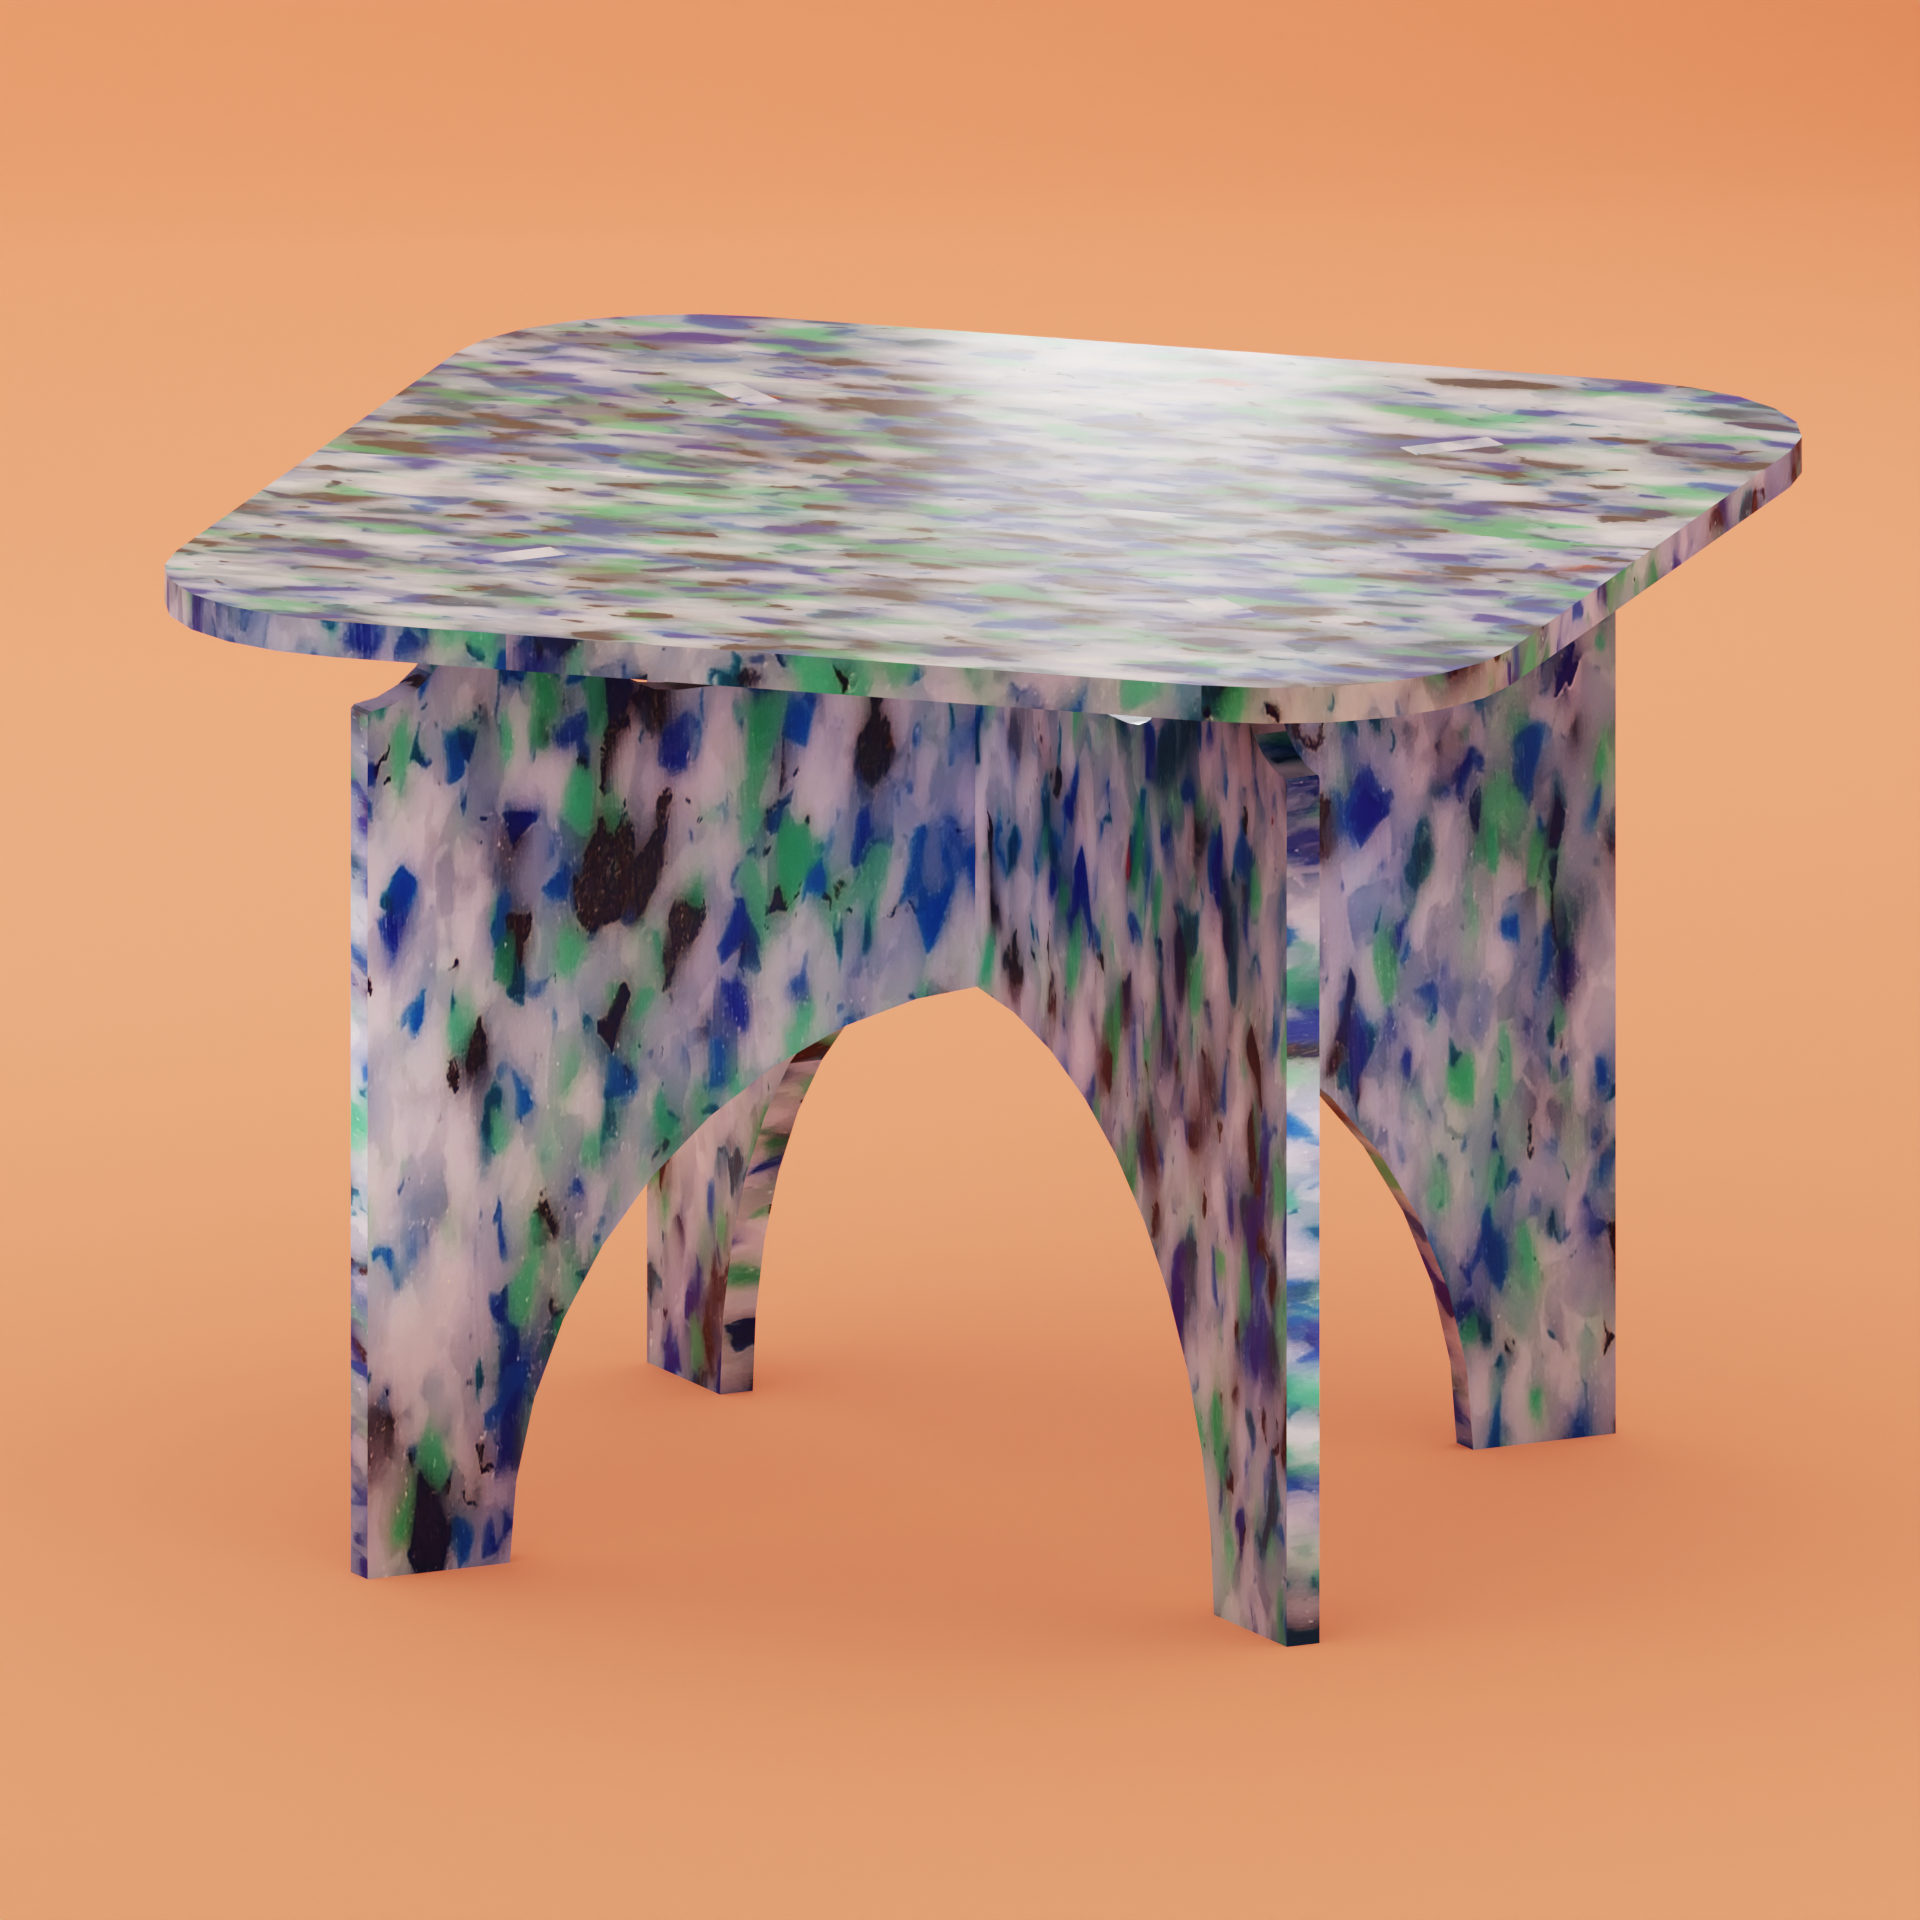 BLUE SQUARE TOP TABLE BY THE MINIMONO PROJECT - BRAND FOR ECO FRIENDLY - PLAYFUL - MULTI FUNCTIONAL - SUSTAINABLE - HIGH QUALITY - DESIGN FURNITURE FROM RECYCLED PLASTIC FOR BOTH ADULT AND CHILDREN MADE IN BERLIN GERMANY